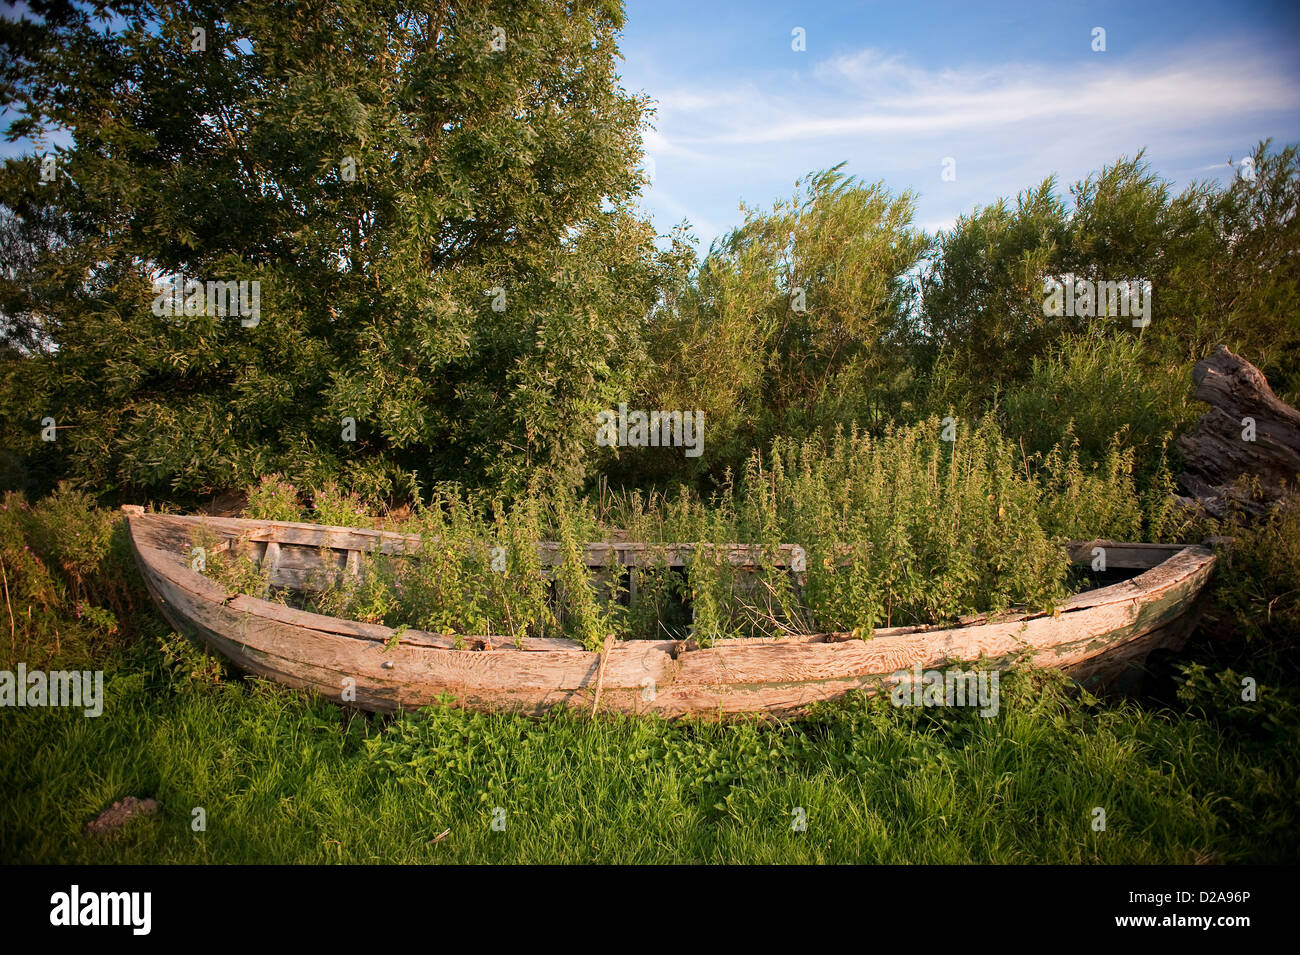 New churches, Ruegen, Germany, the wreck of a wooden boat Stock Photo